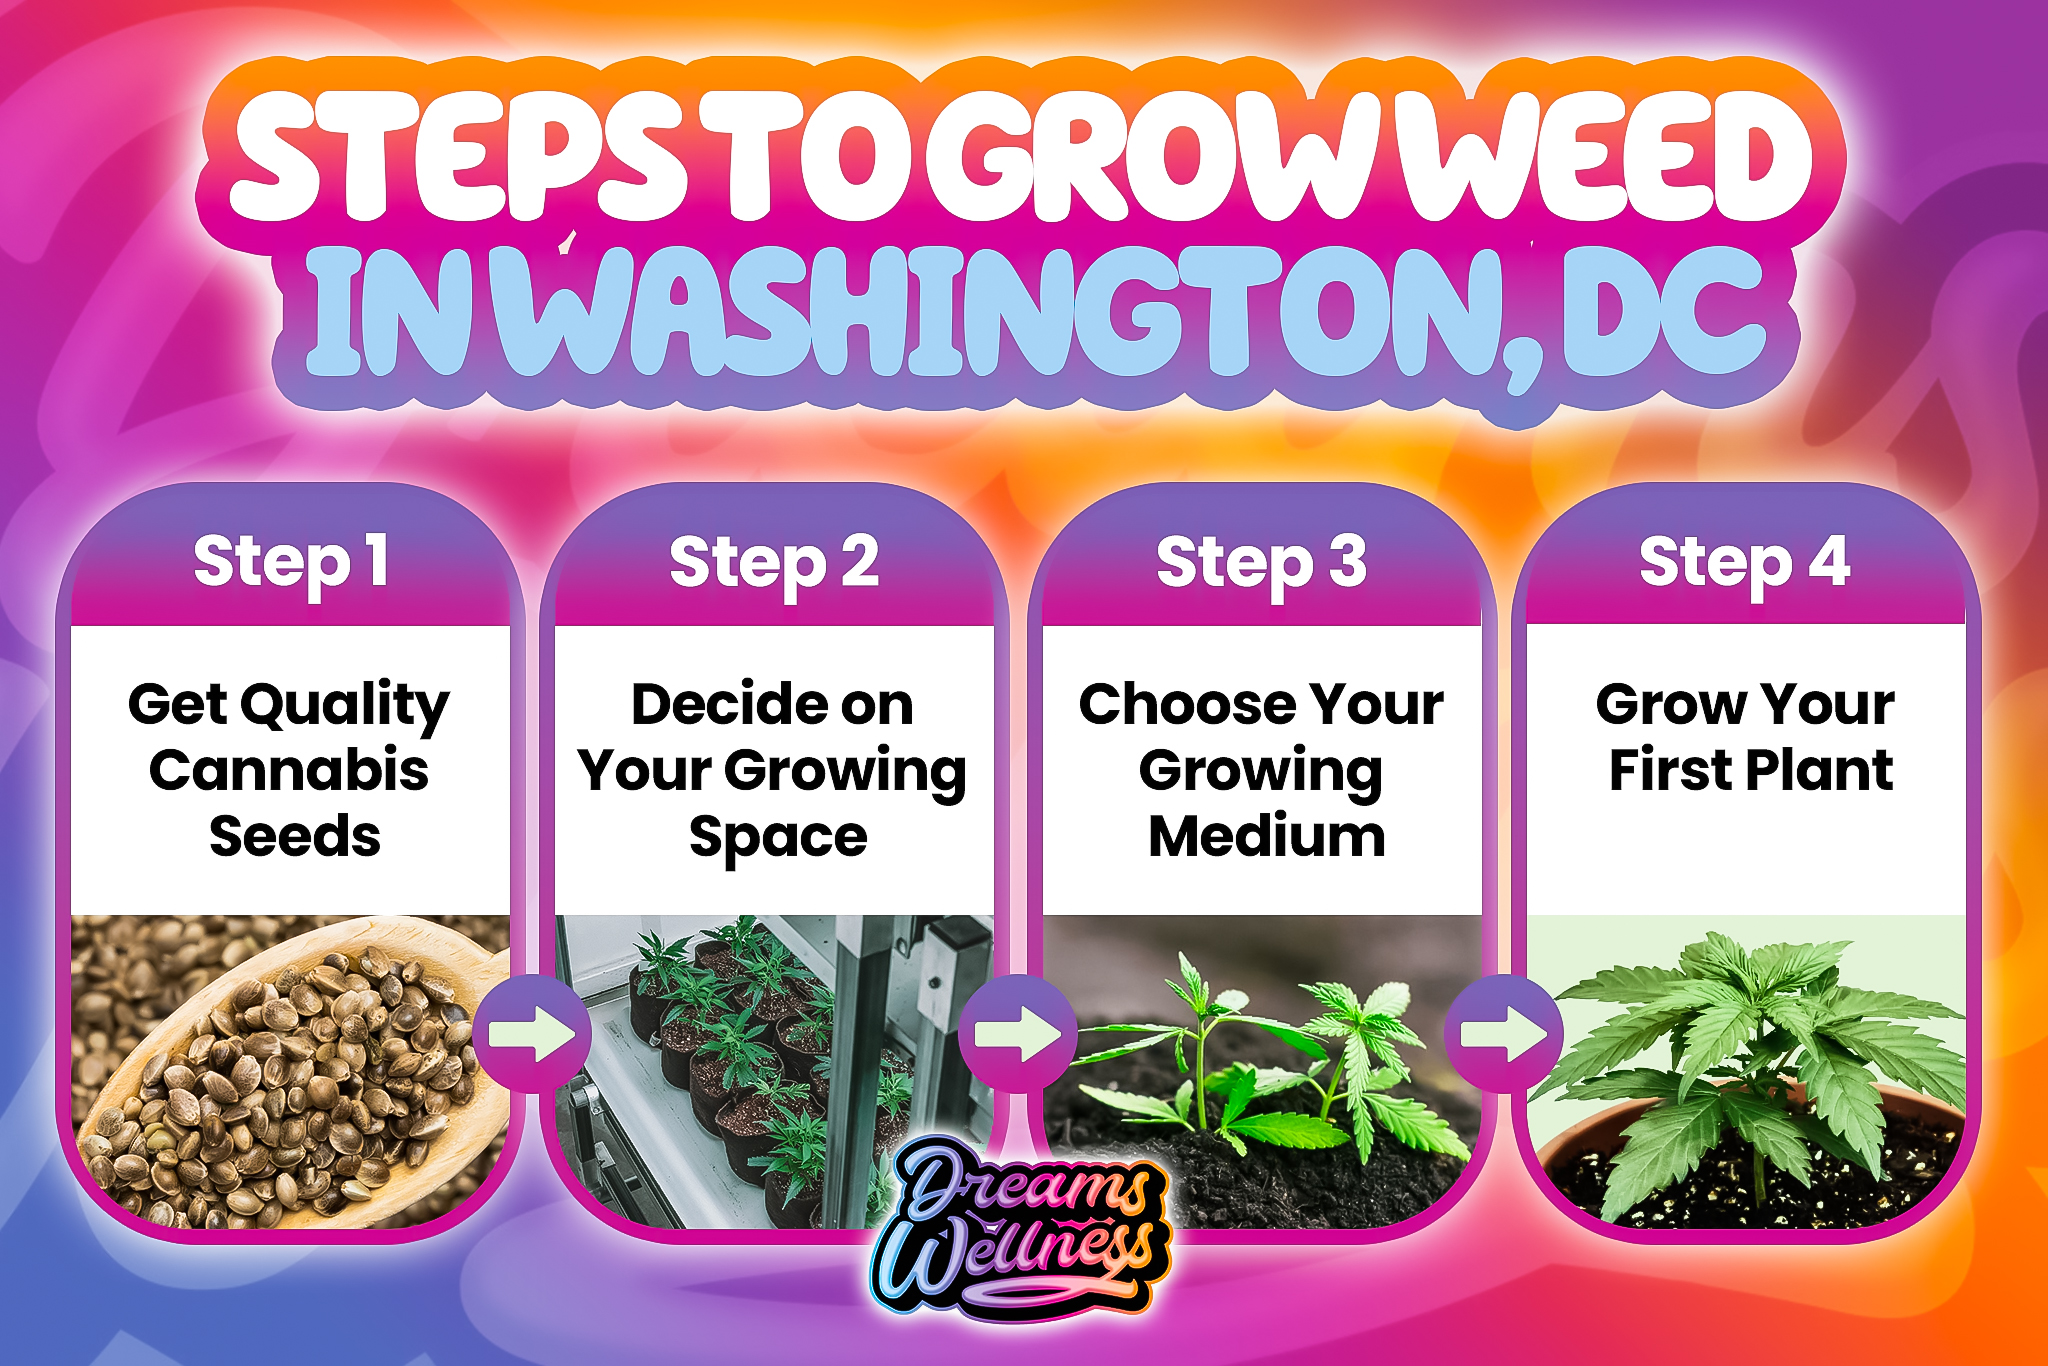 steps to grow weed in washington dc